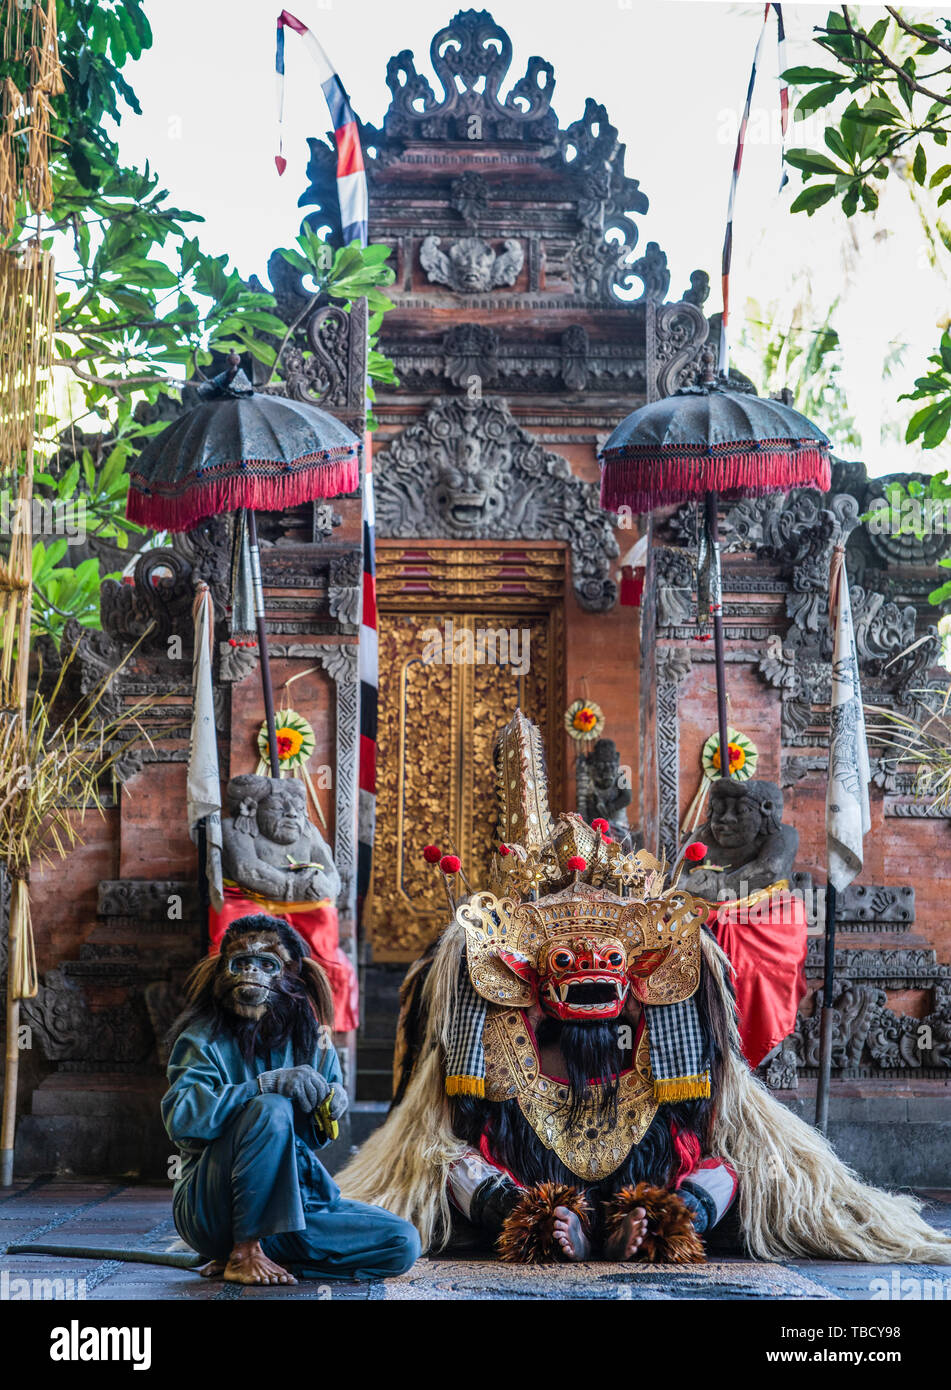 Banjar Gelulung, Bali, Indonesia - February 26, 2019: Mas Village. Play on  stage setting. Monkey figure in blue jumper sits besides rised dragon in fr  Stock Photo - Alamy